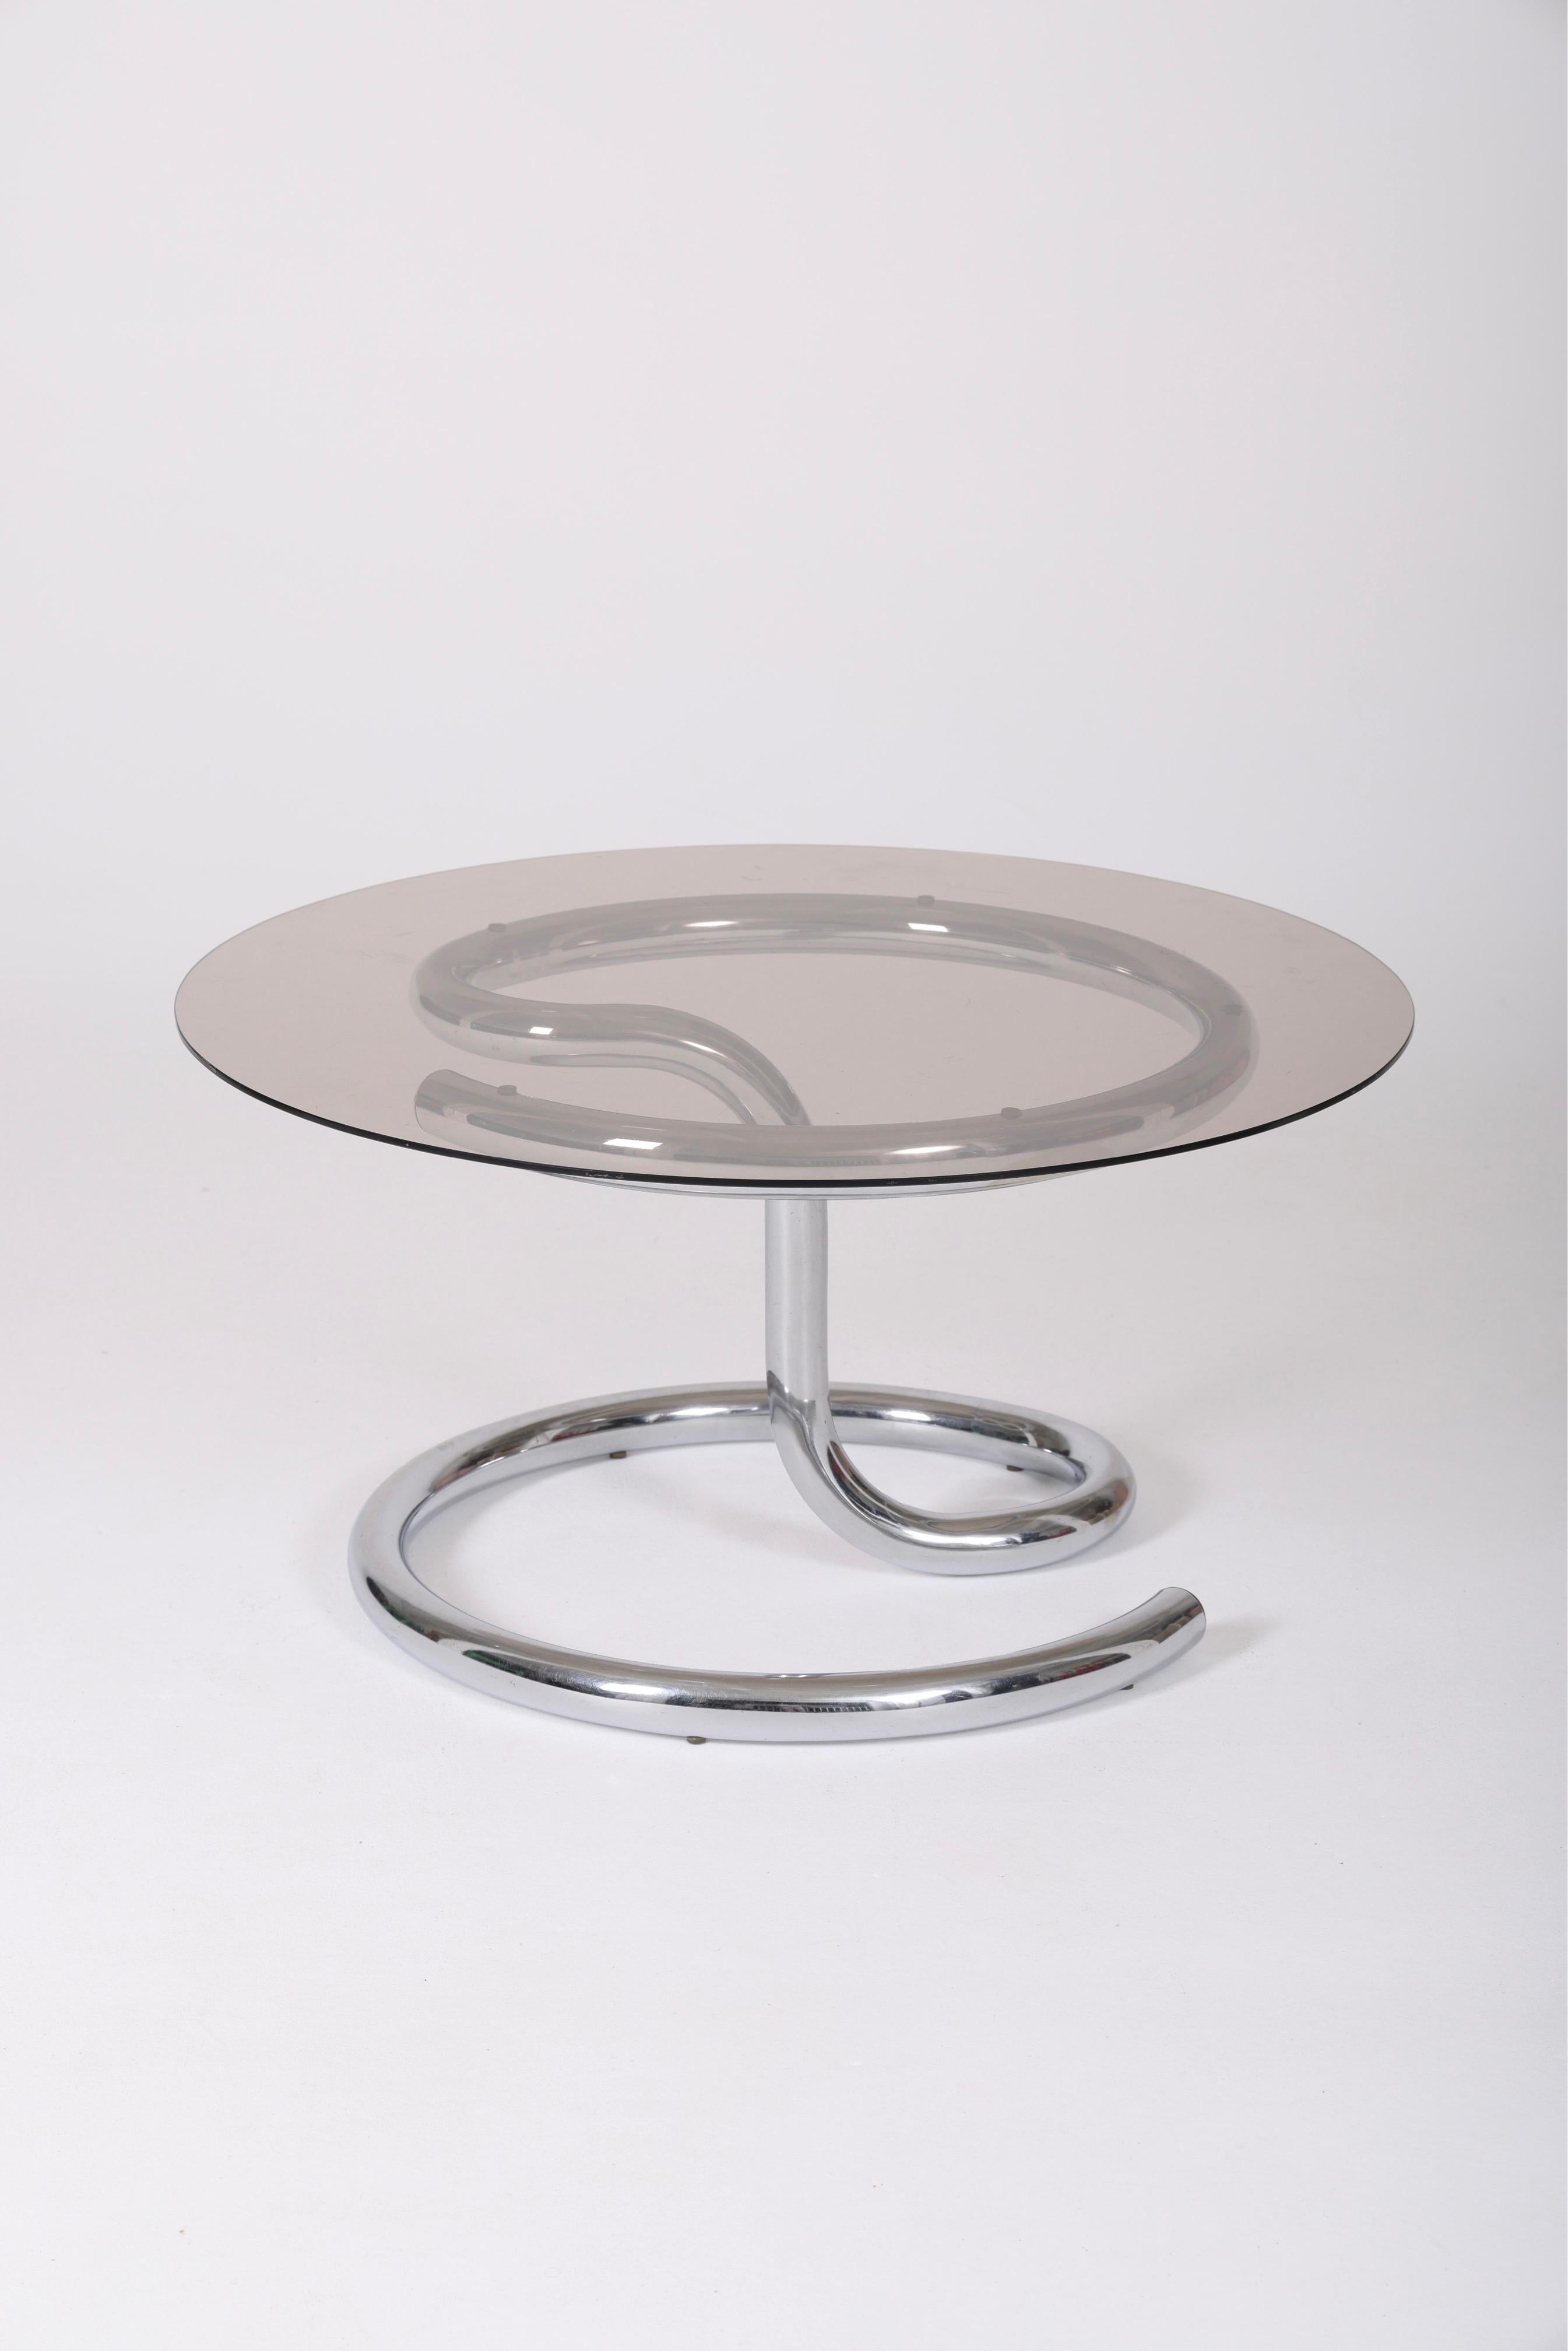 Round coffee table, Anaconda model by designer Paul Tuttle, from the 1970s. Chromed metal base and smoked glass tabletop. In very good condition.
LP836.